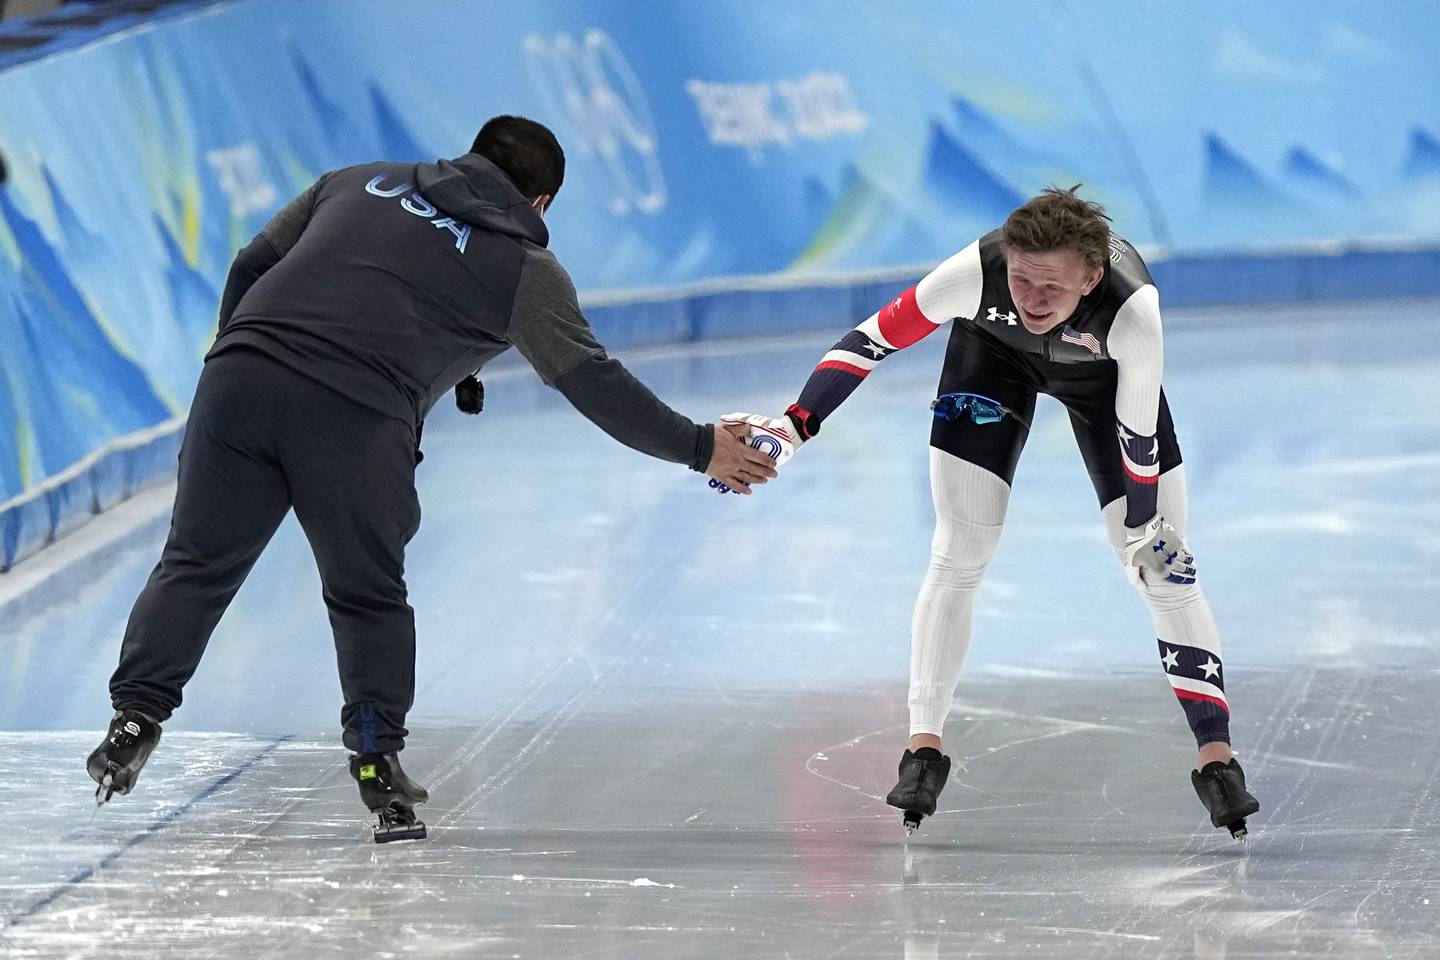 Ethan Cepuran of the United States is greeted by a coach after finishing his heat during the men's speedskating 5,000-meter race at the 2022 Winter Olympics, Sunday, Feb. 6, 2022, in Beijing. (AP Photo/Ashley Landis)